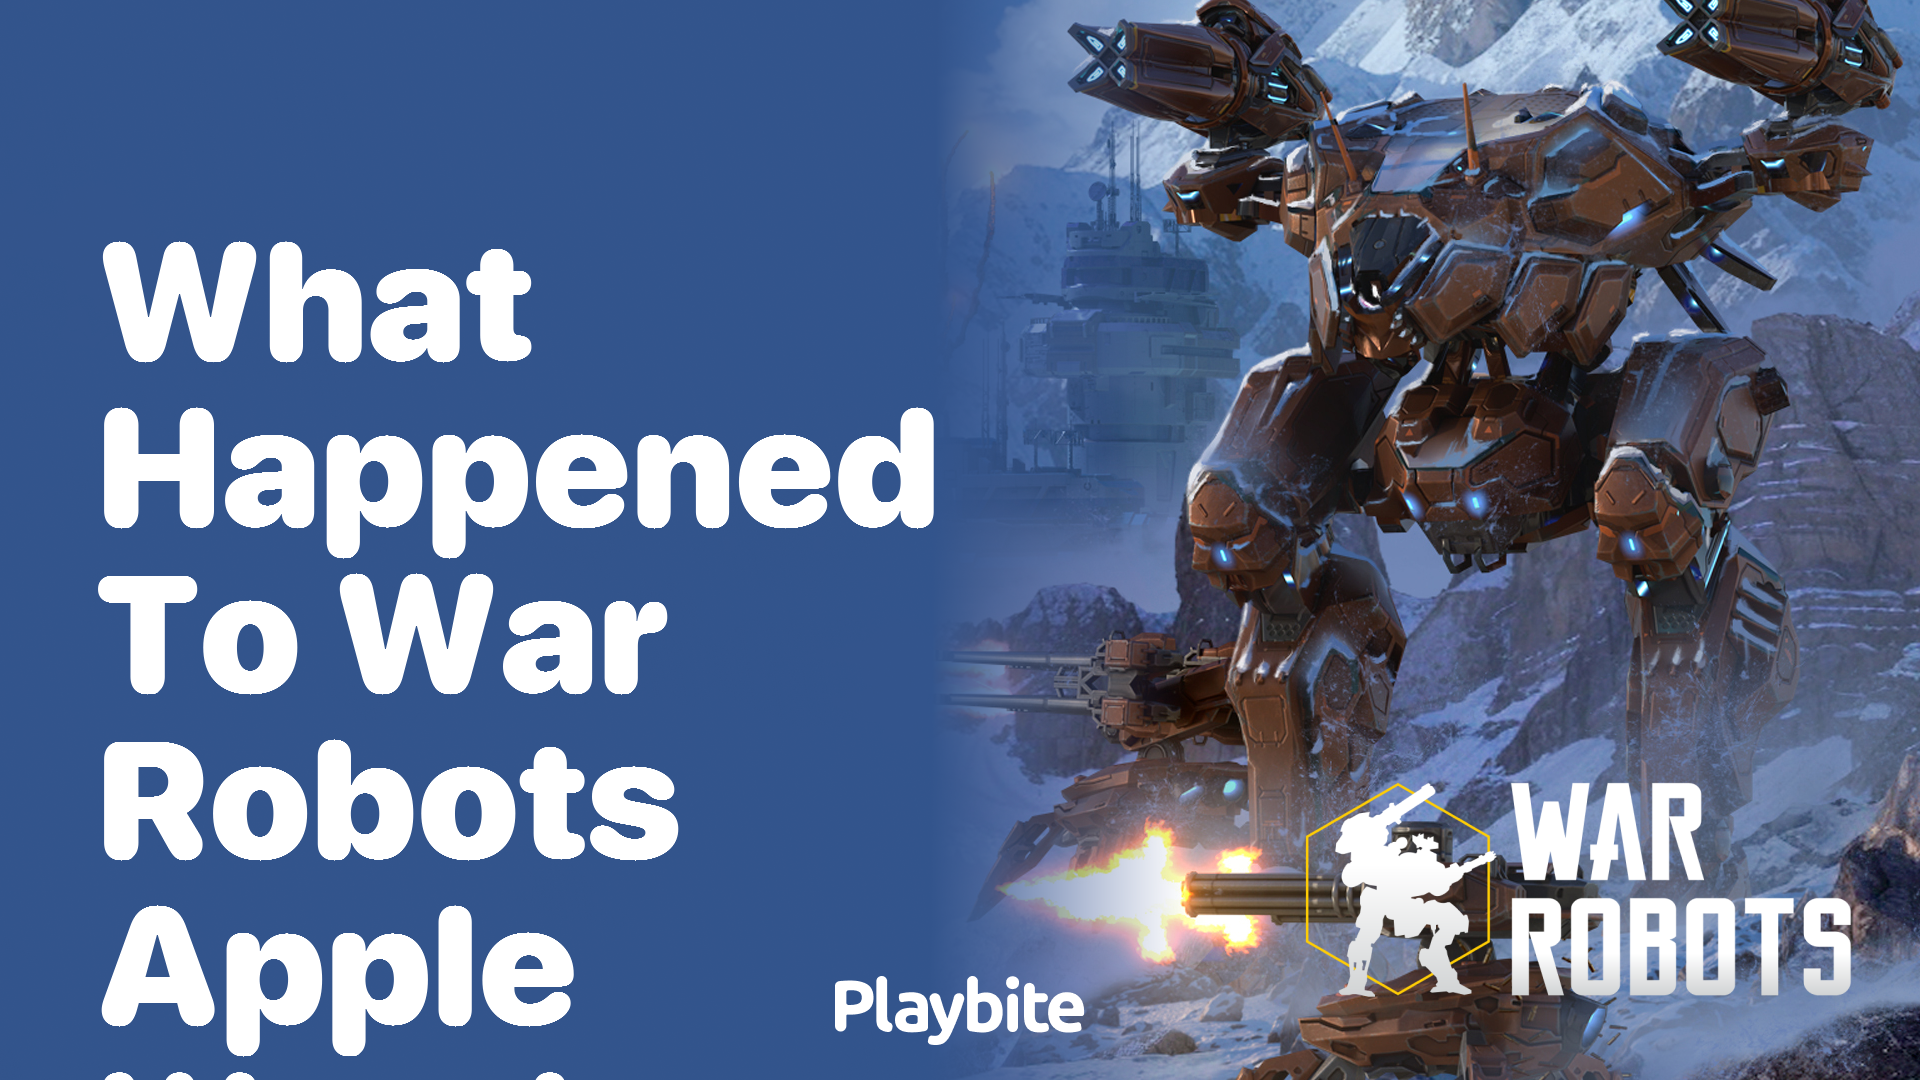 What Happened to War Robots on Apple Watch?